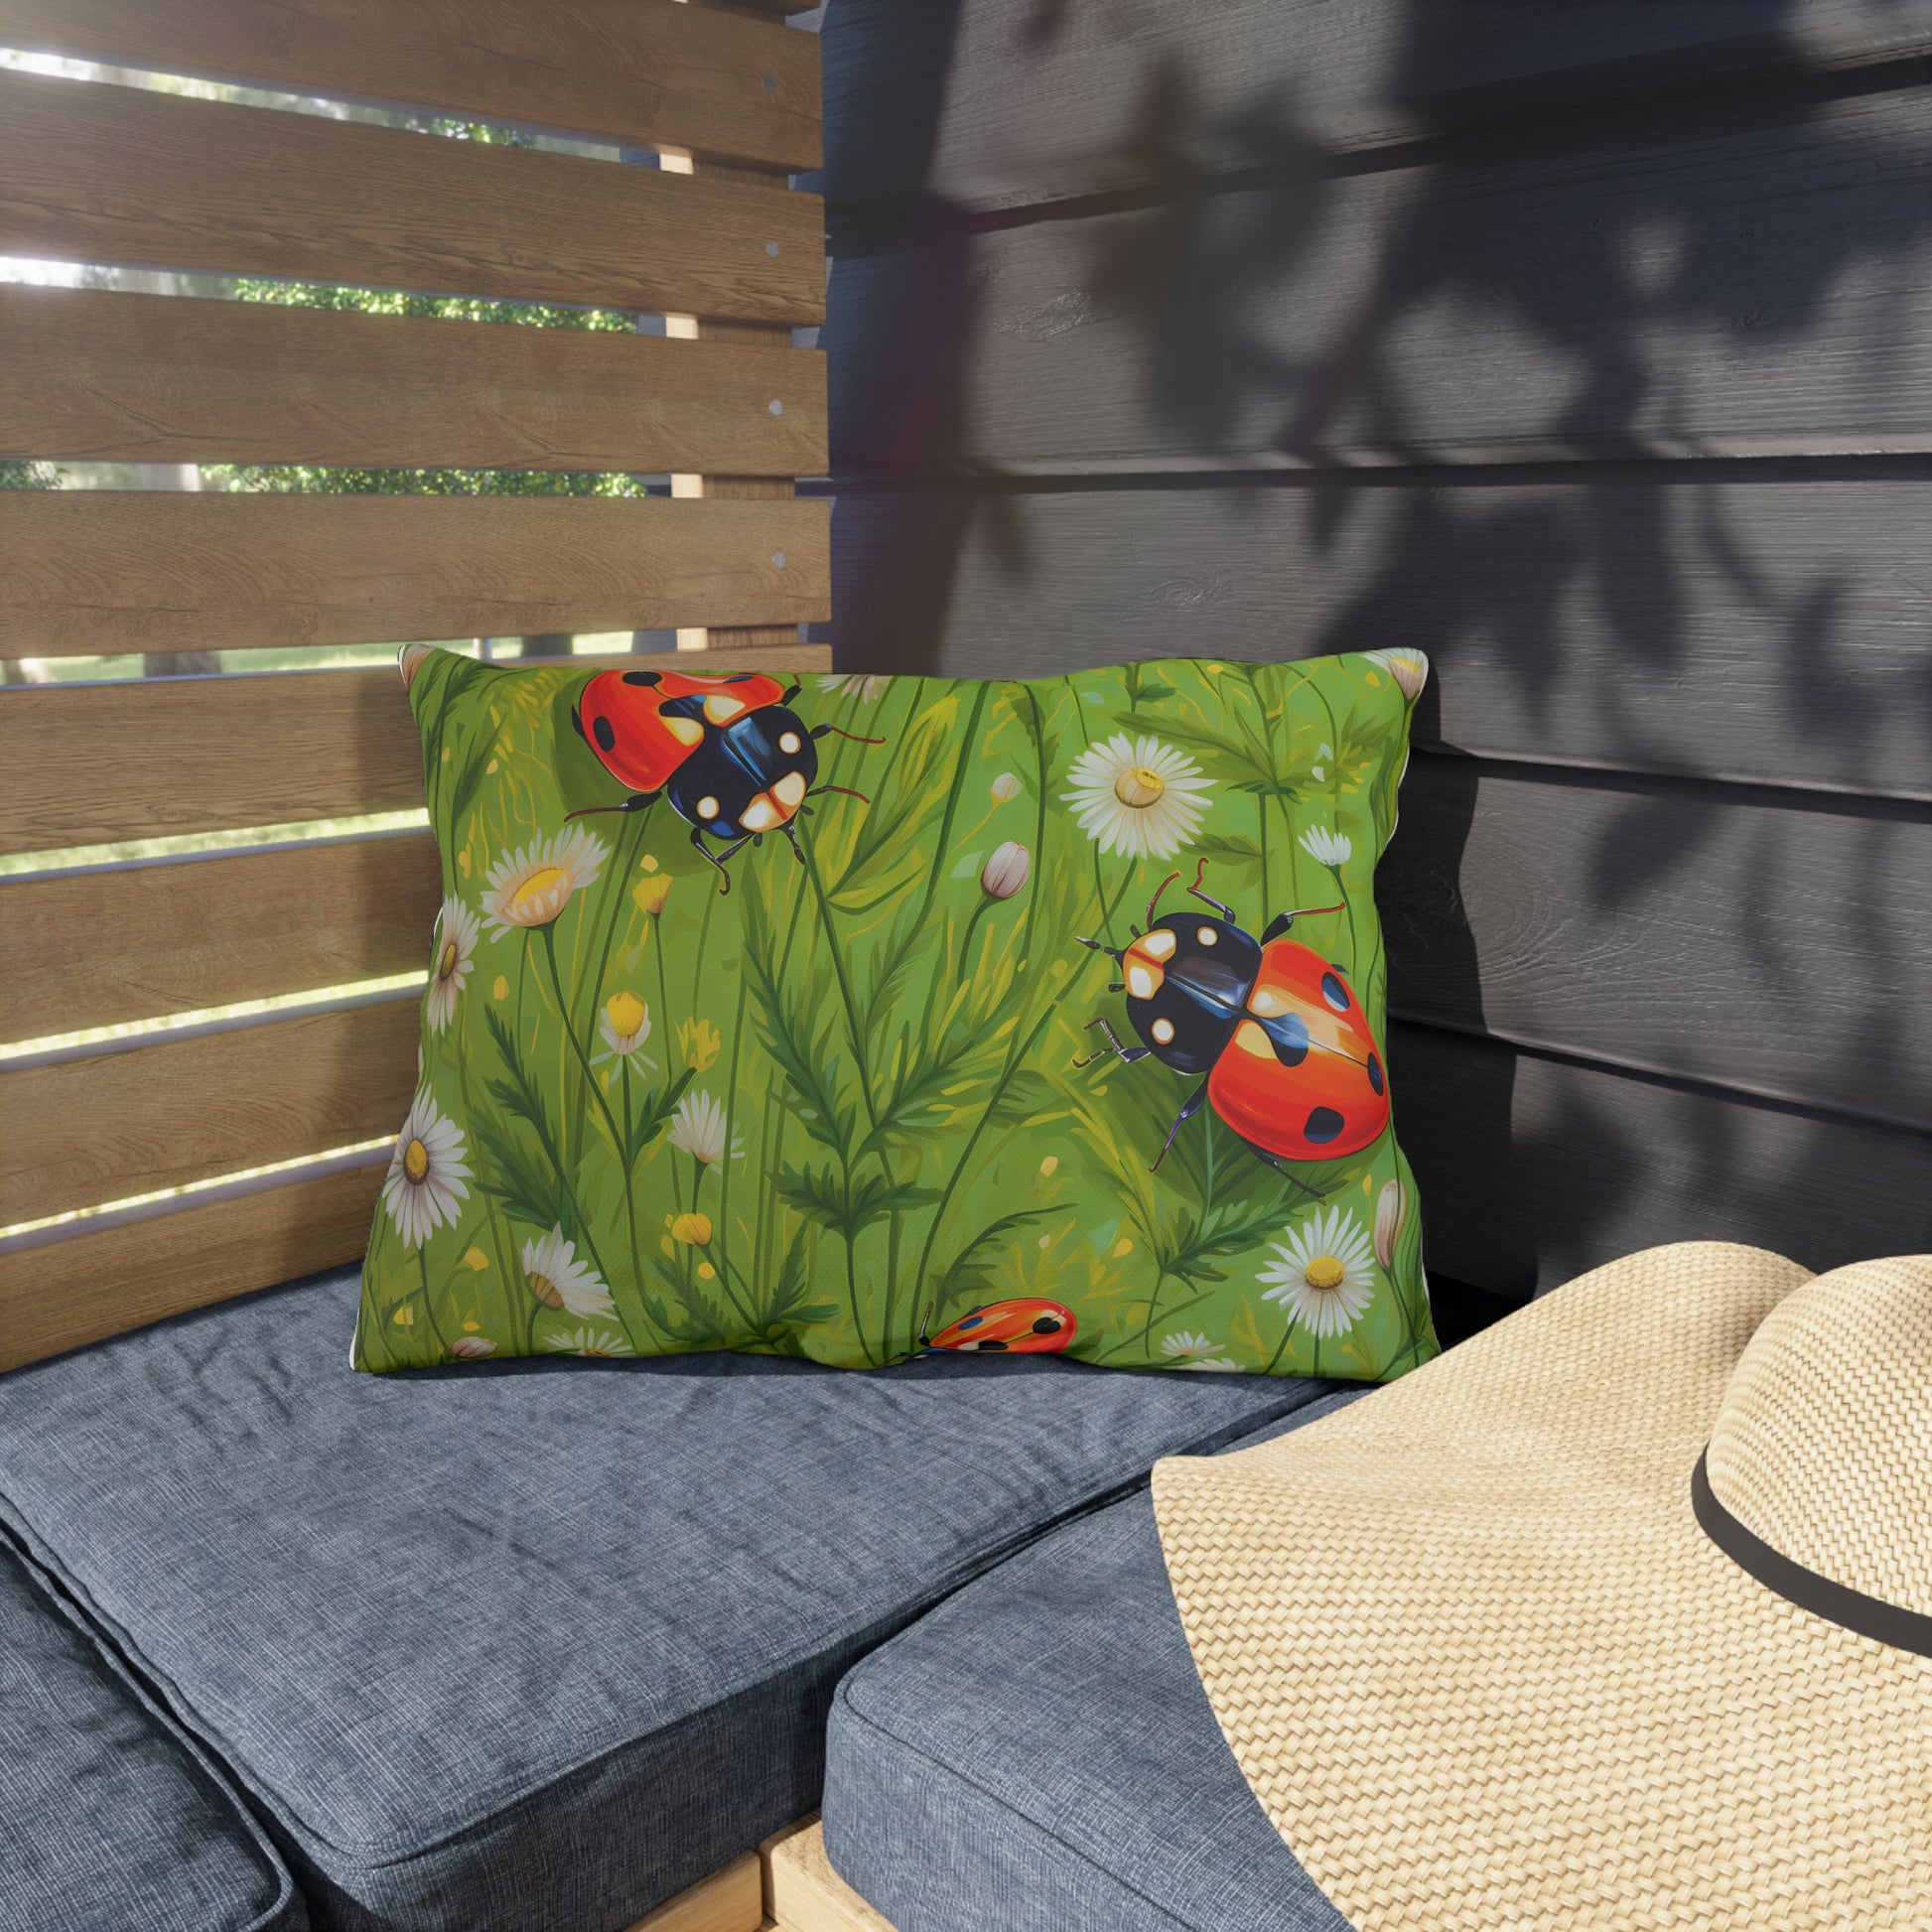 Durable Outdoor Pillow | Ladybugs & Flowers Throw Pillow from The Curated Goose